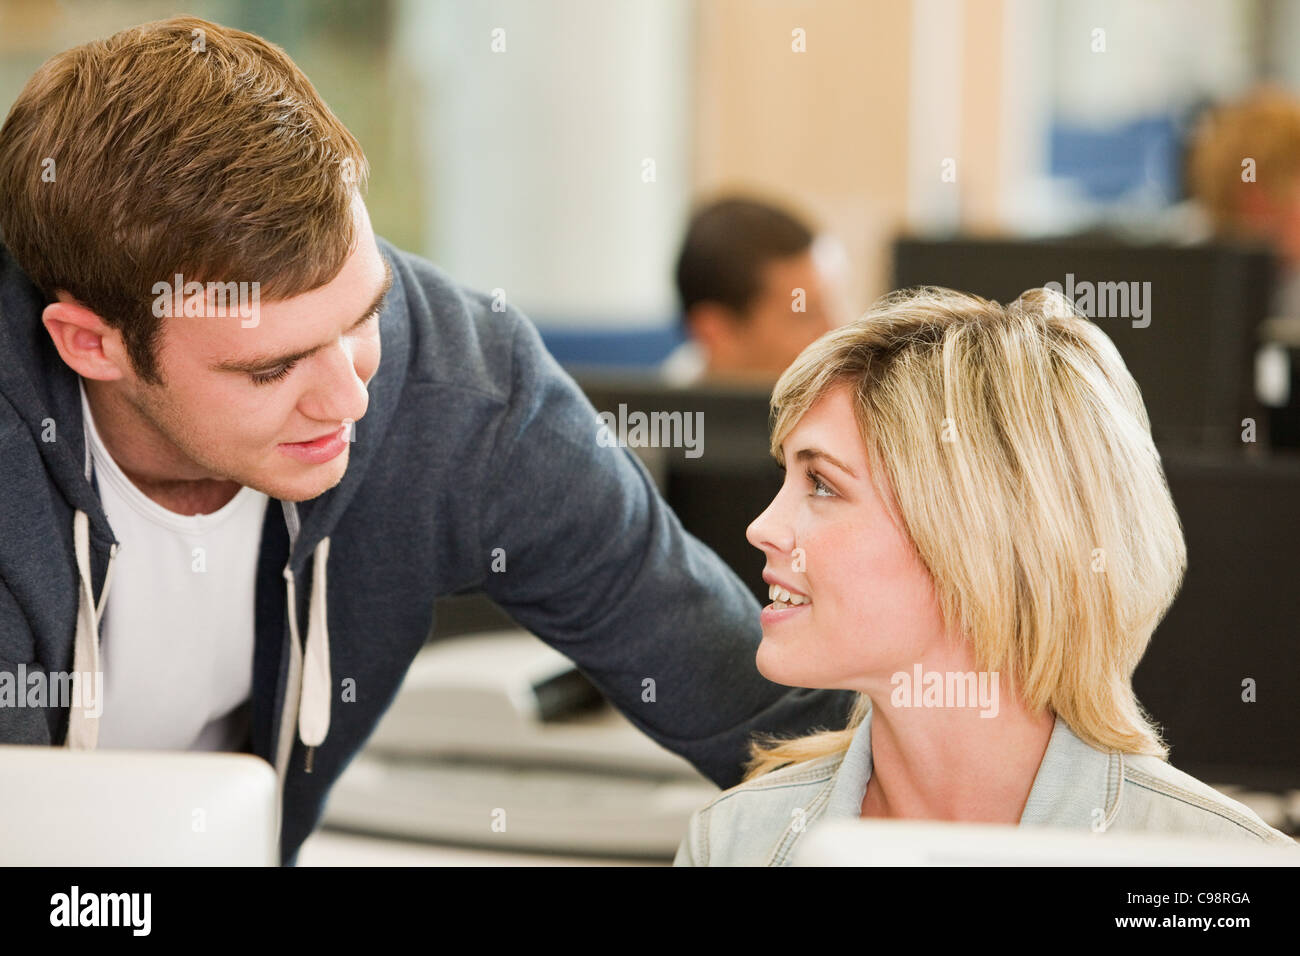 University students working together Stock Photo